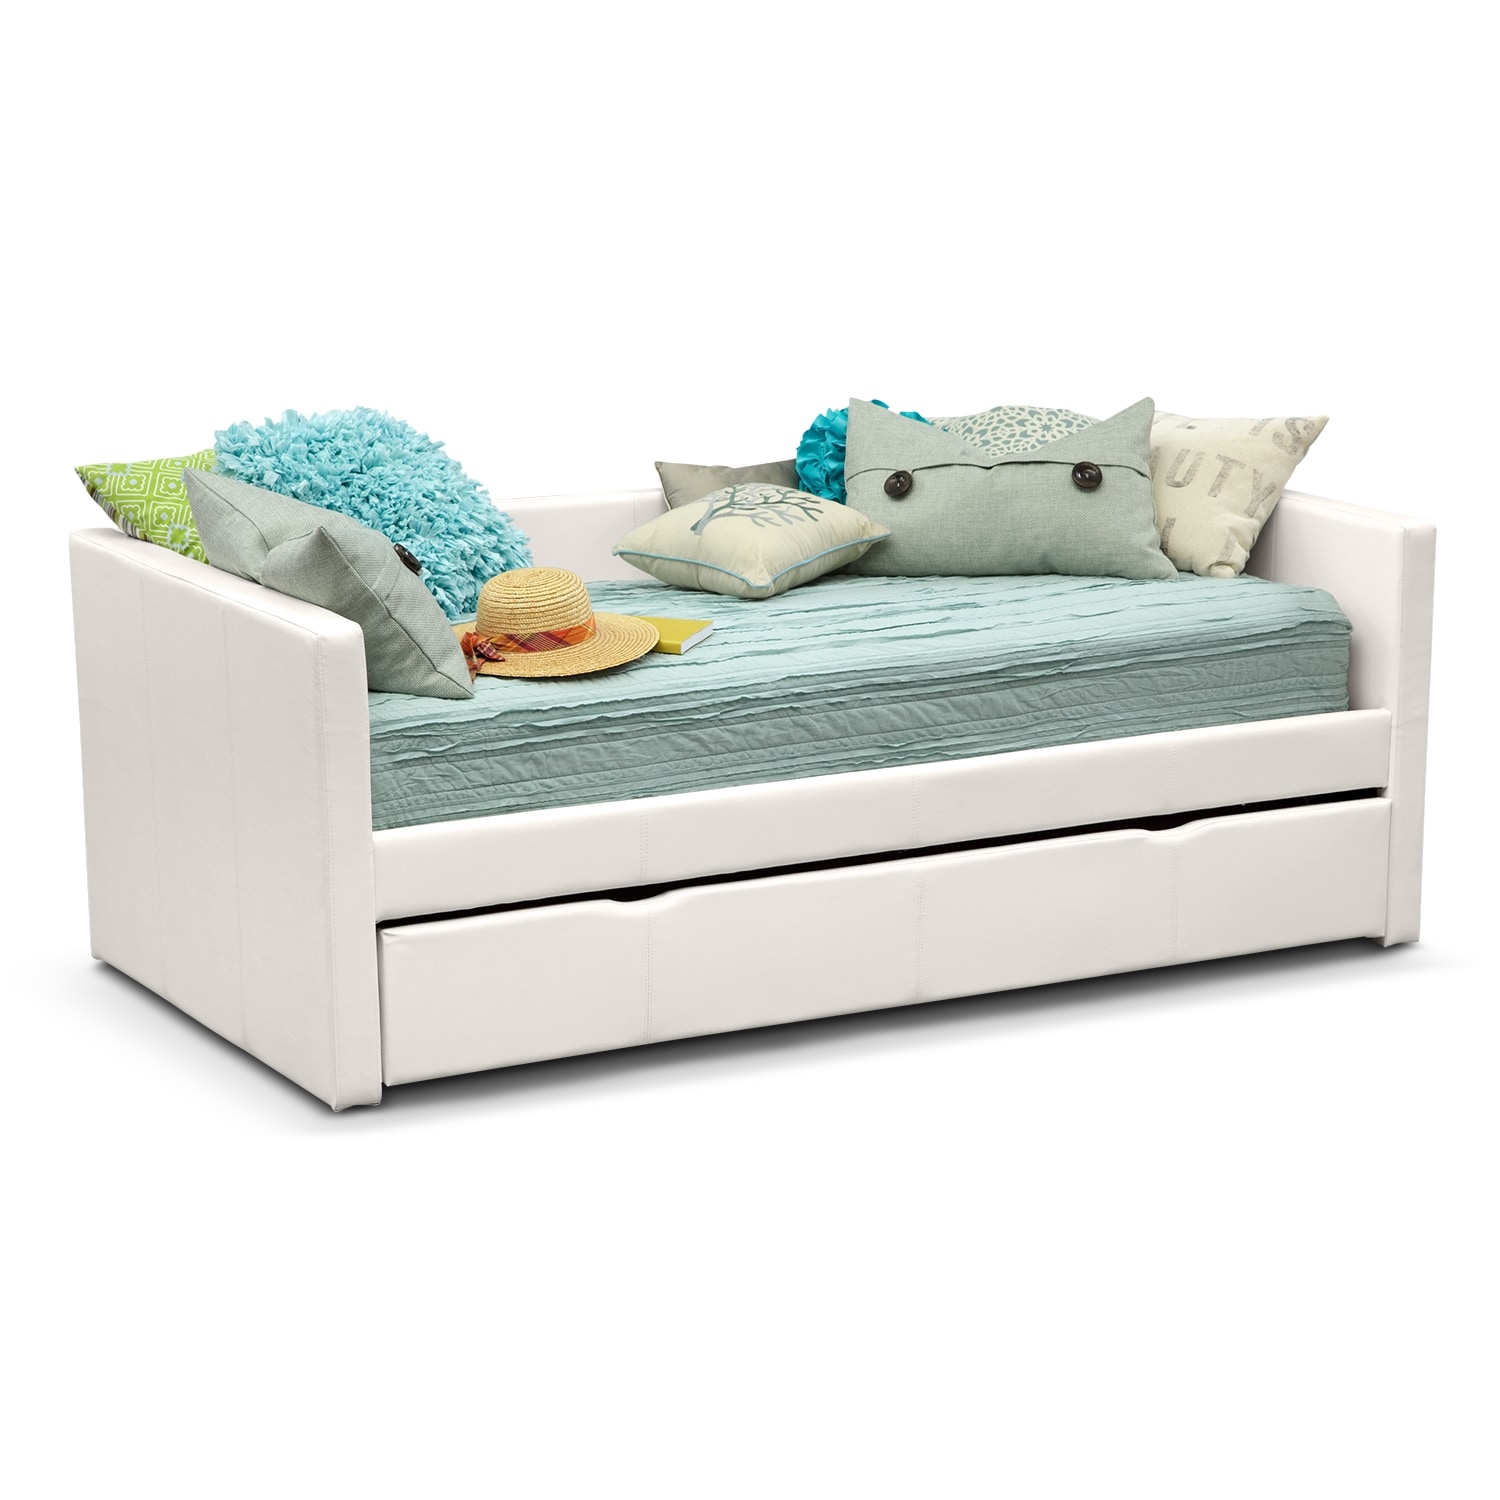 Daybeds for kids